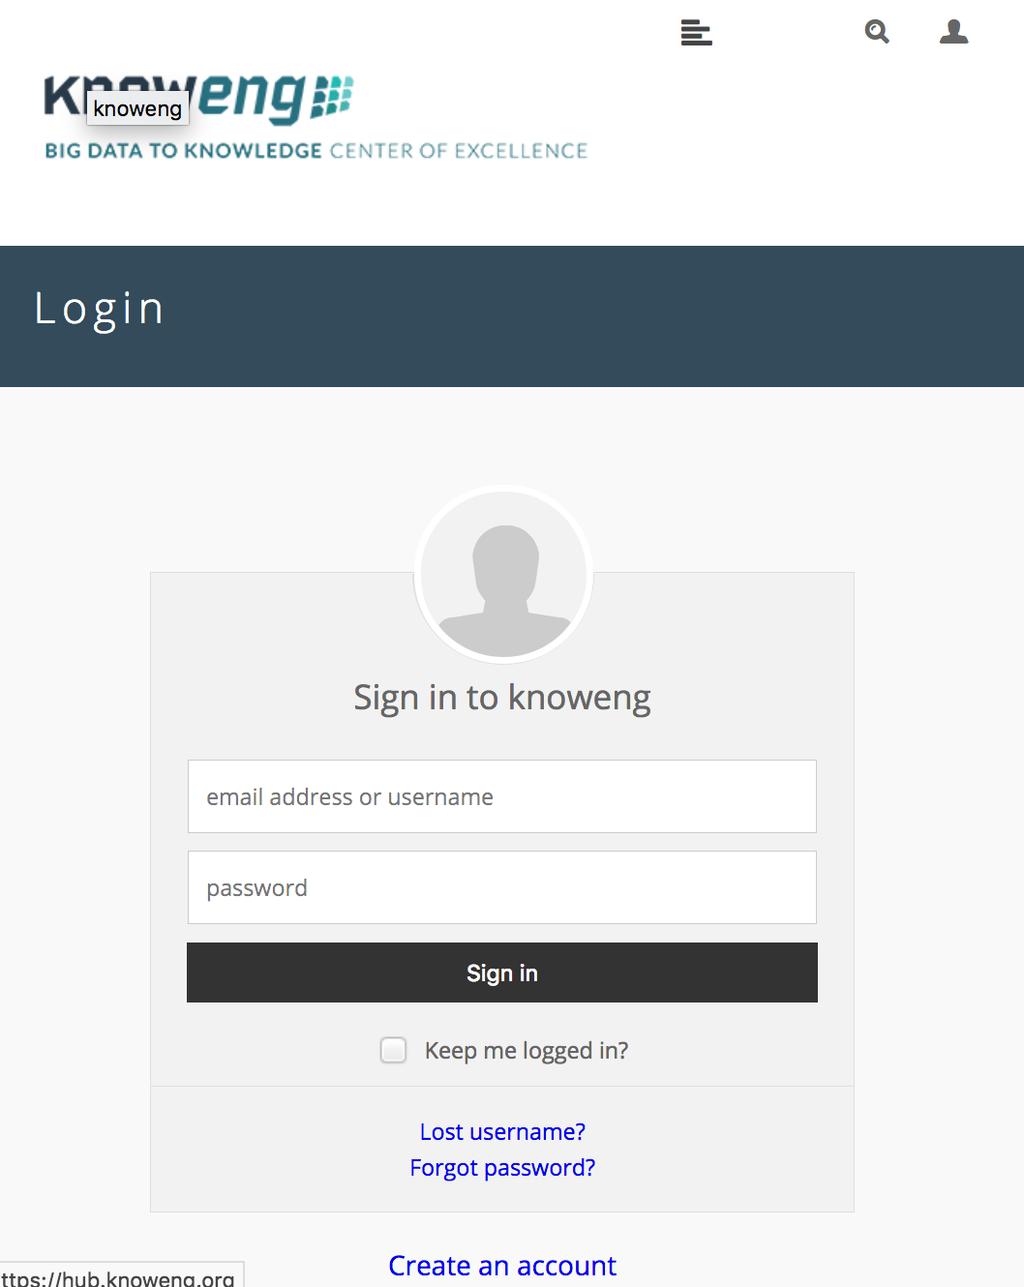 STEP1: Sign In Follow the link to the HubZero login screen: https://hub.knoweng.